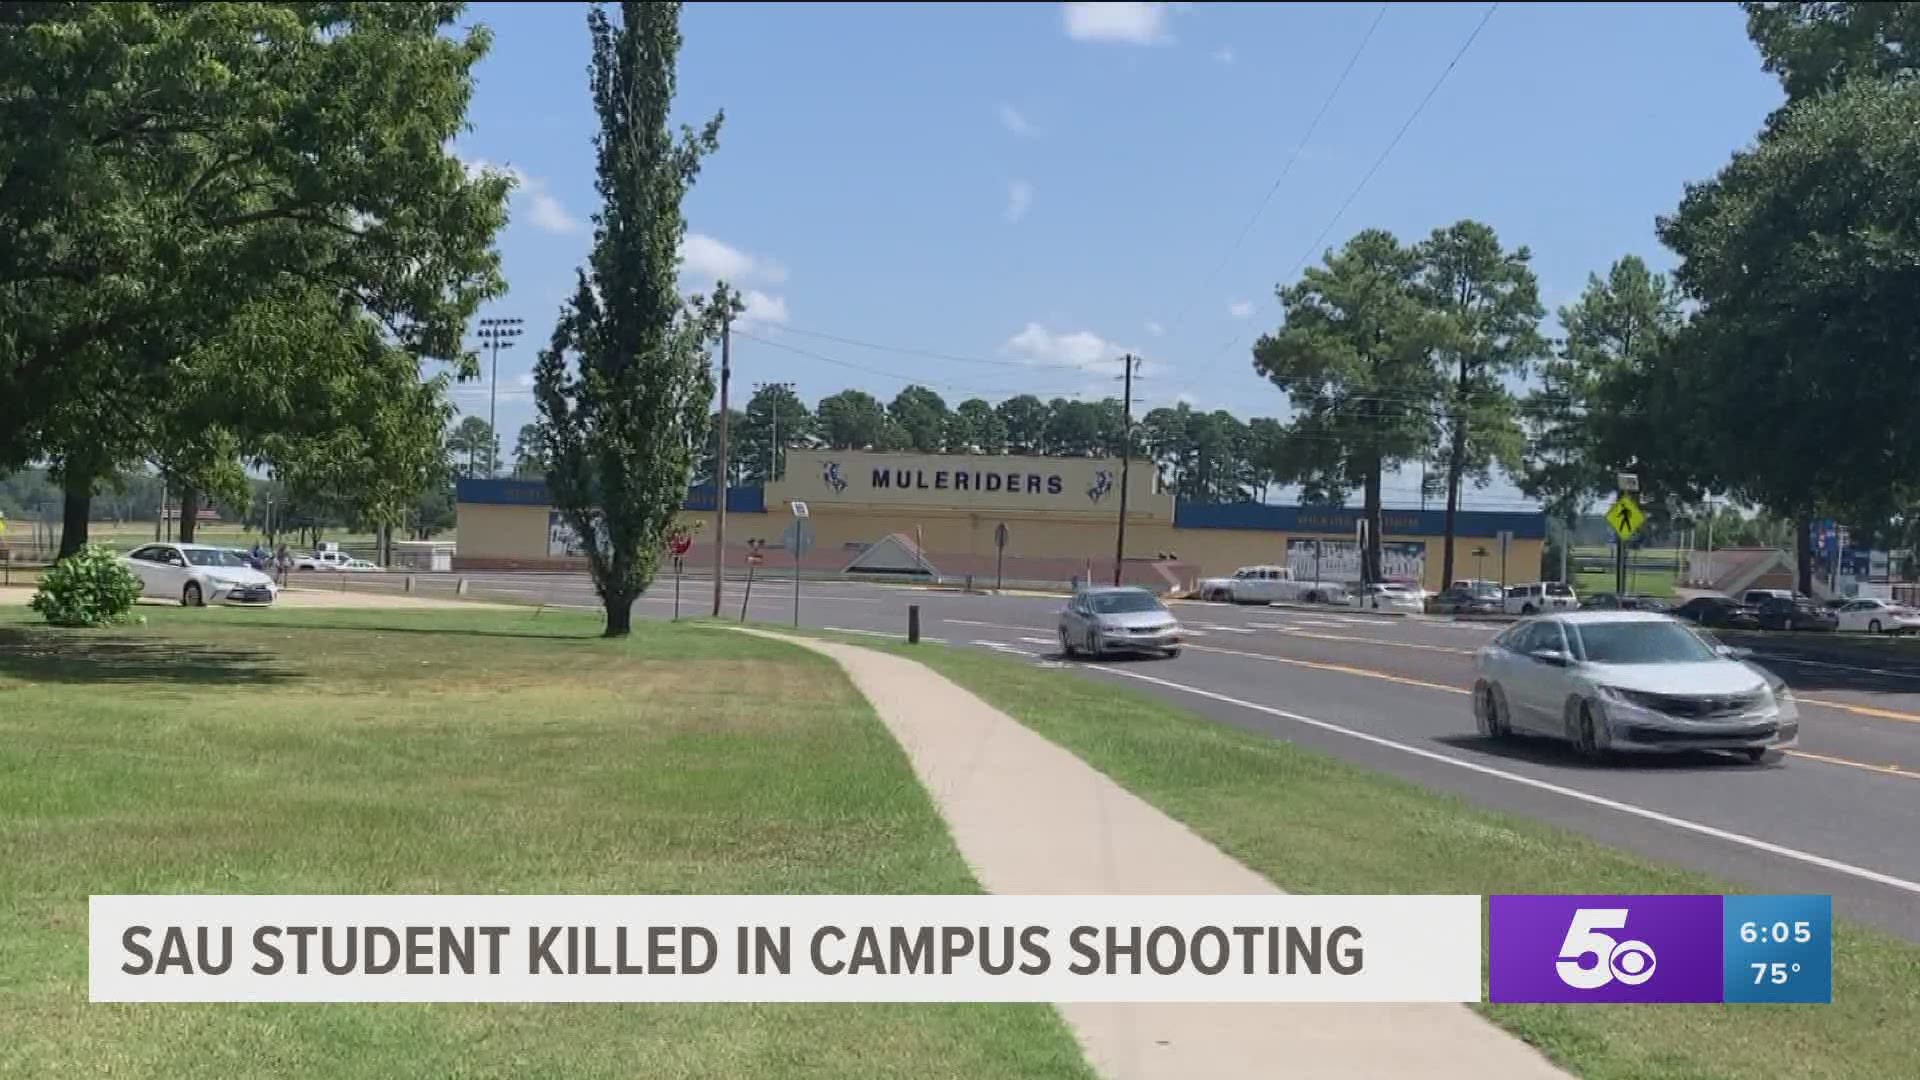 The shooting occurred in the Reynolds Center parking lot early Tuesday (Aug. 11). https://bit.ly/30KpMyW